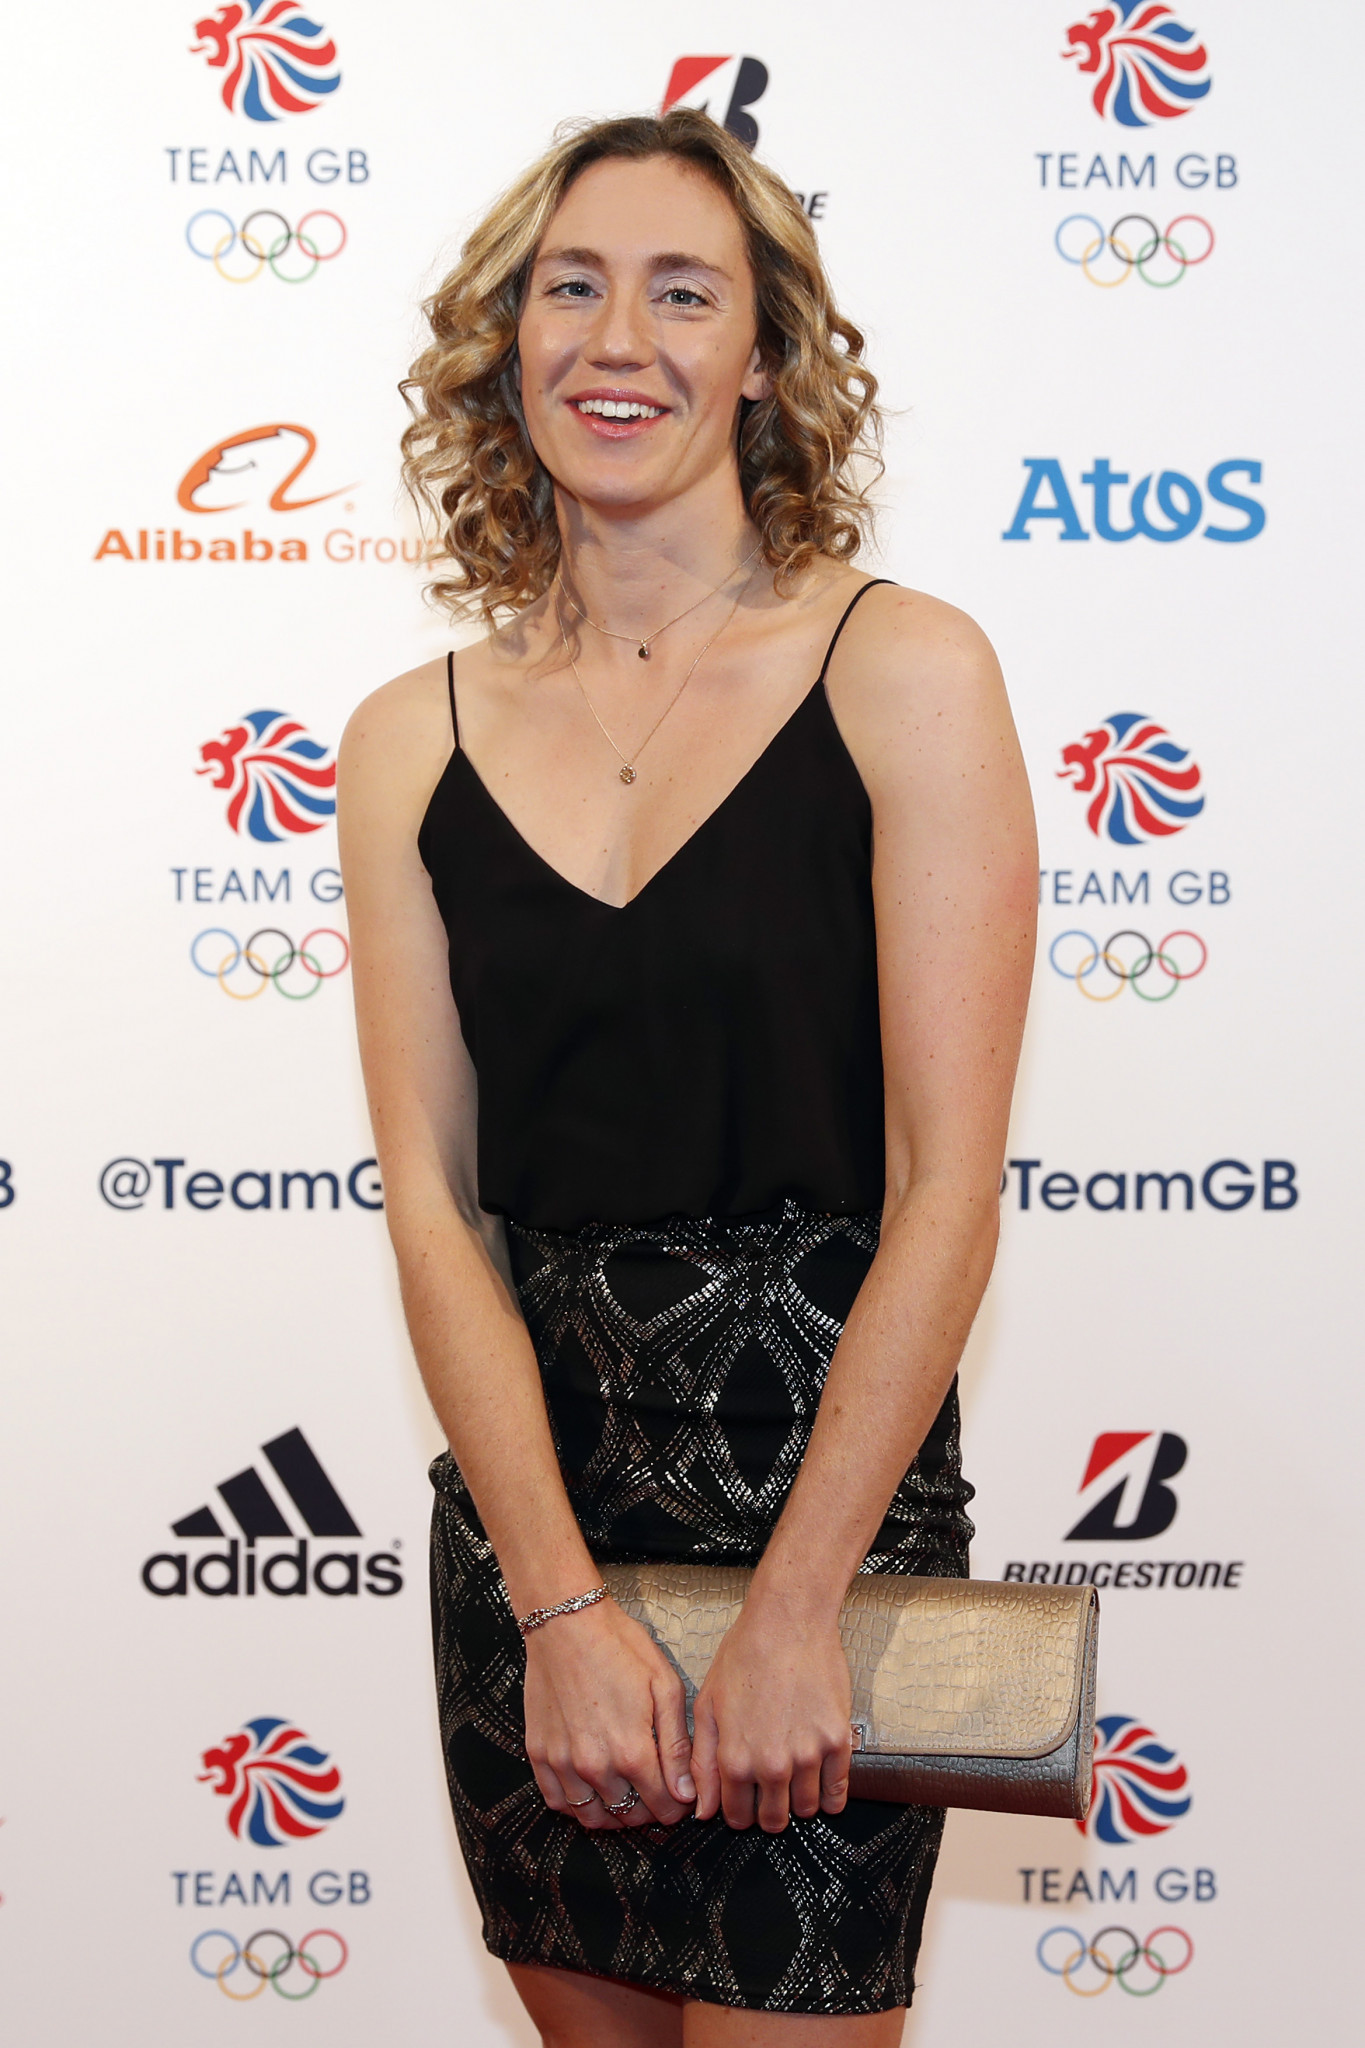 Simmonds elected chair of British Olympic Association’s Athletes’ Commission